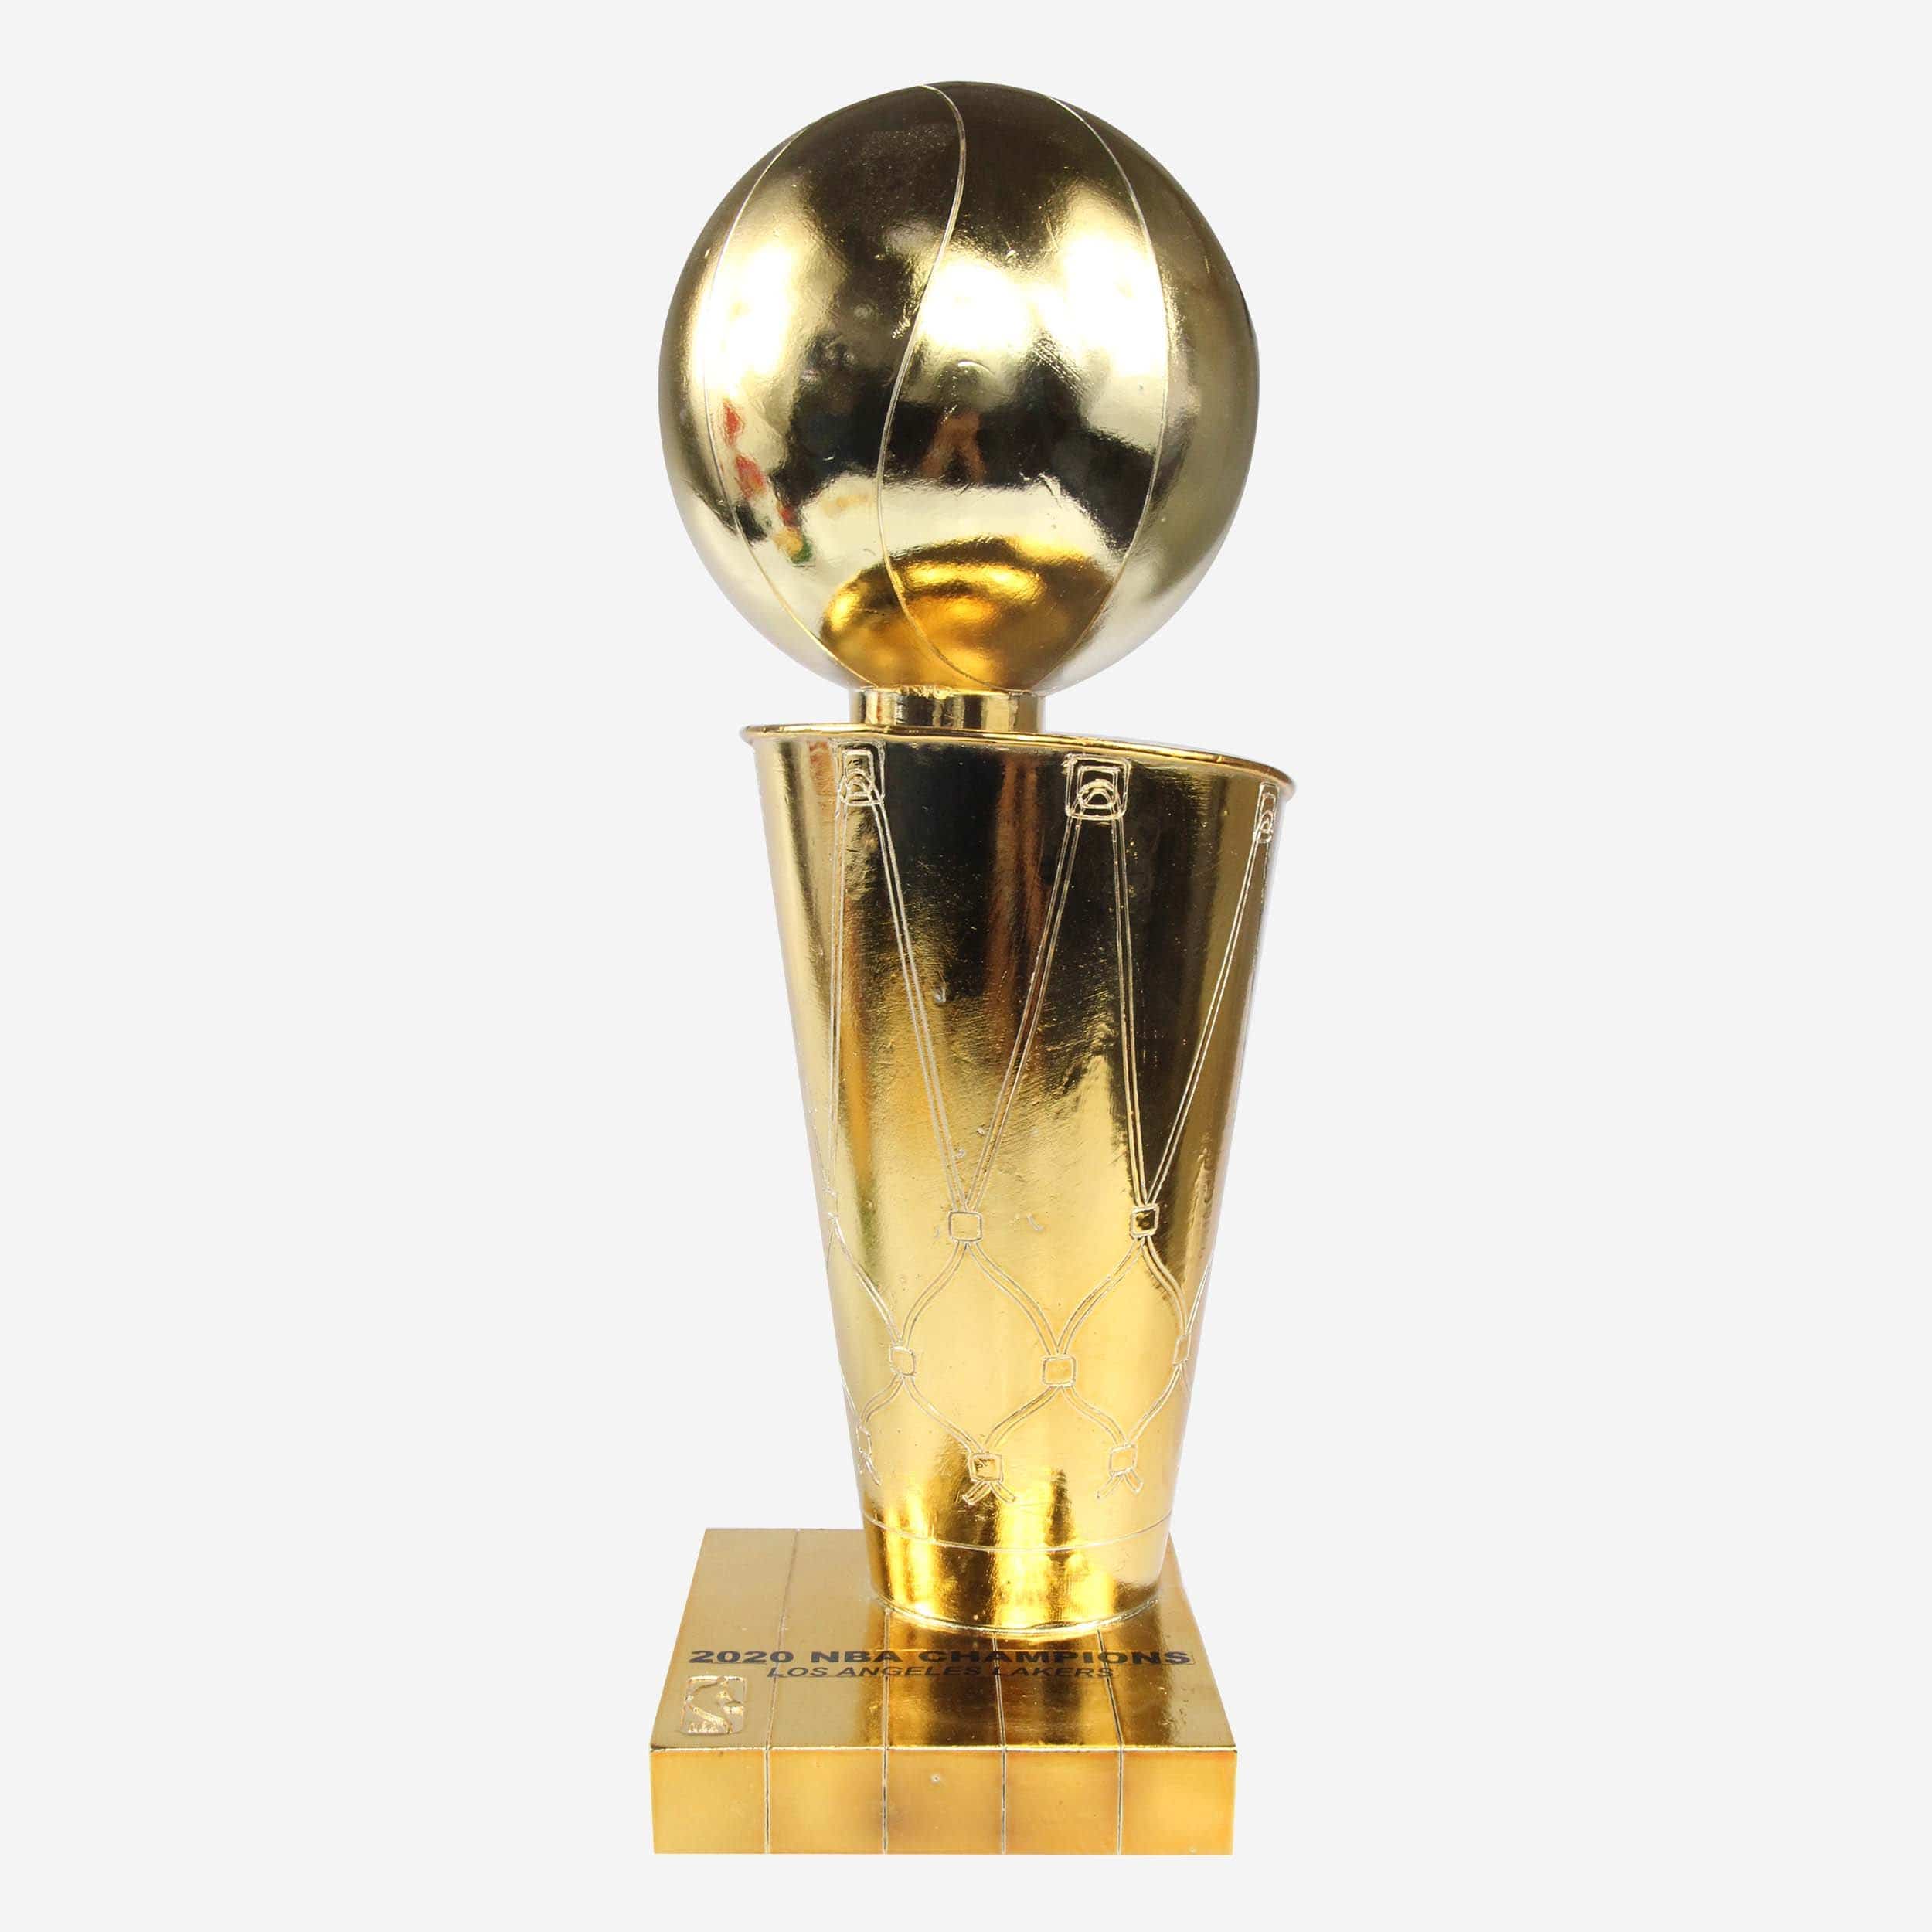 The LA Lakers' NBA Championship Trophy Came in a Louis Vuitton